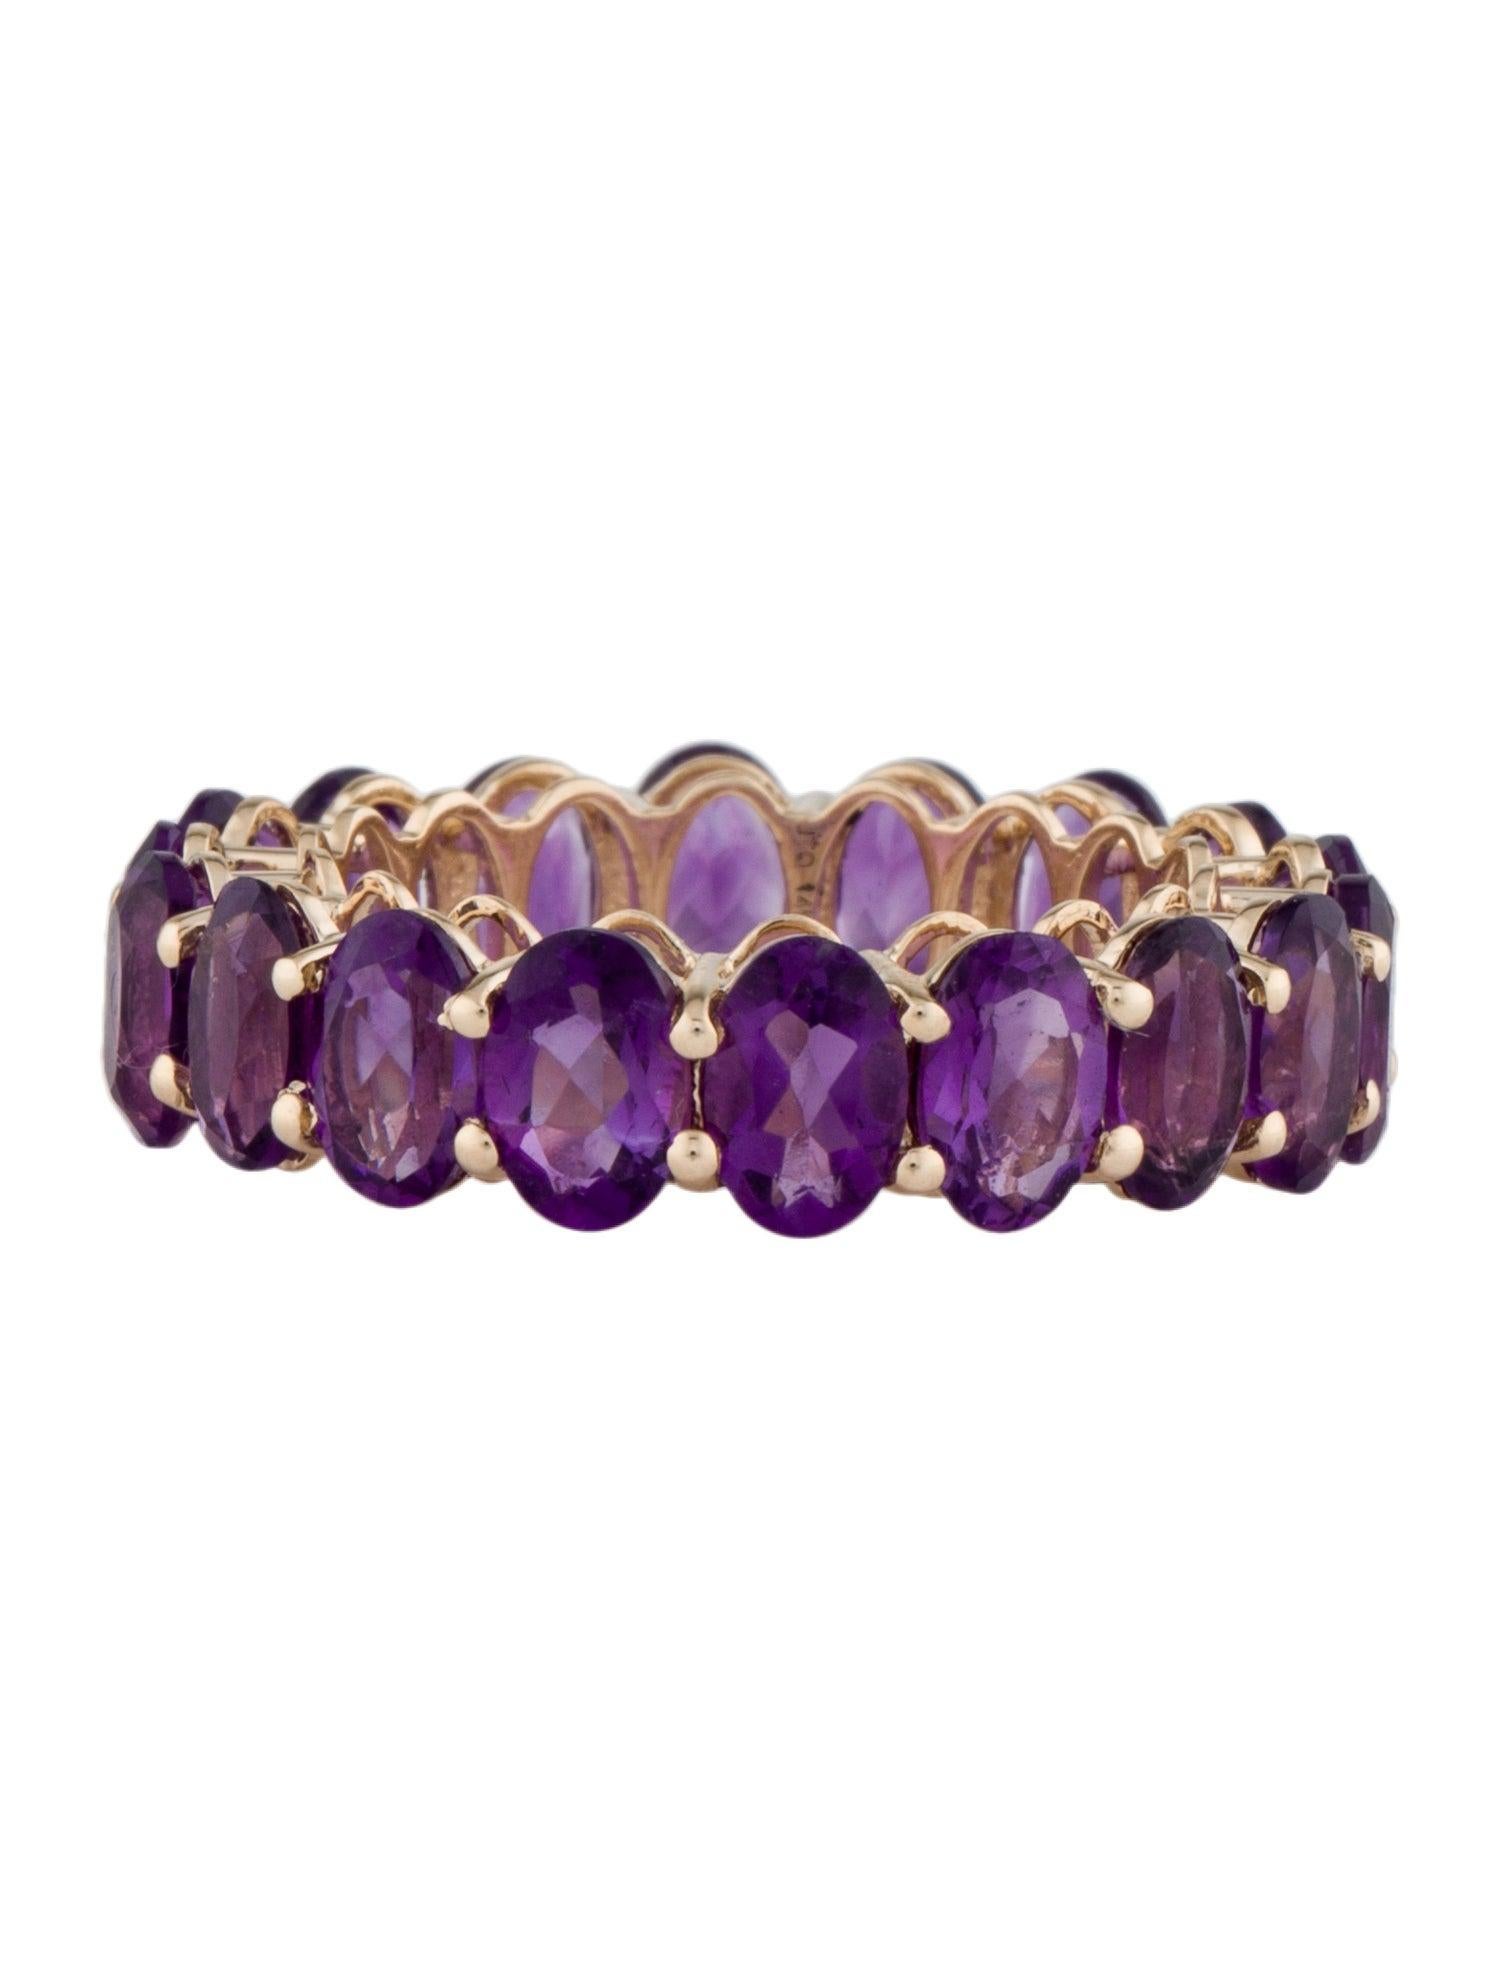 Embrace the captivating beauty of our 14K Yellow Gold Amethyst Eternity Band, a luxurious statement of elegance and sophistication. Sized at 7, this exquisite ring features a total carat weight of 7.05 in oval brilliant amethysts, encircling the